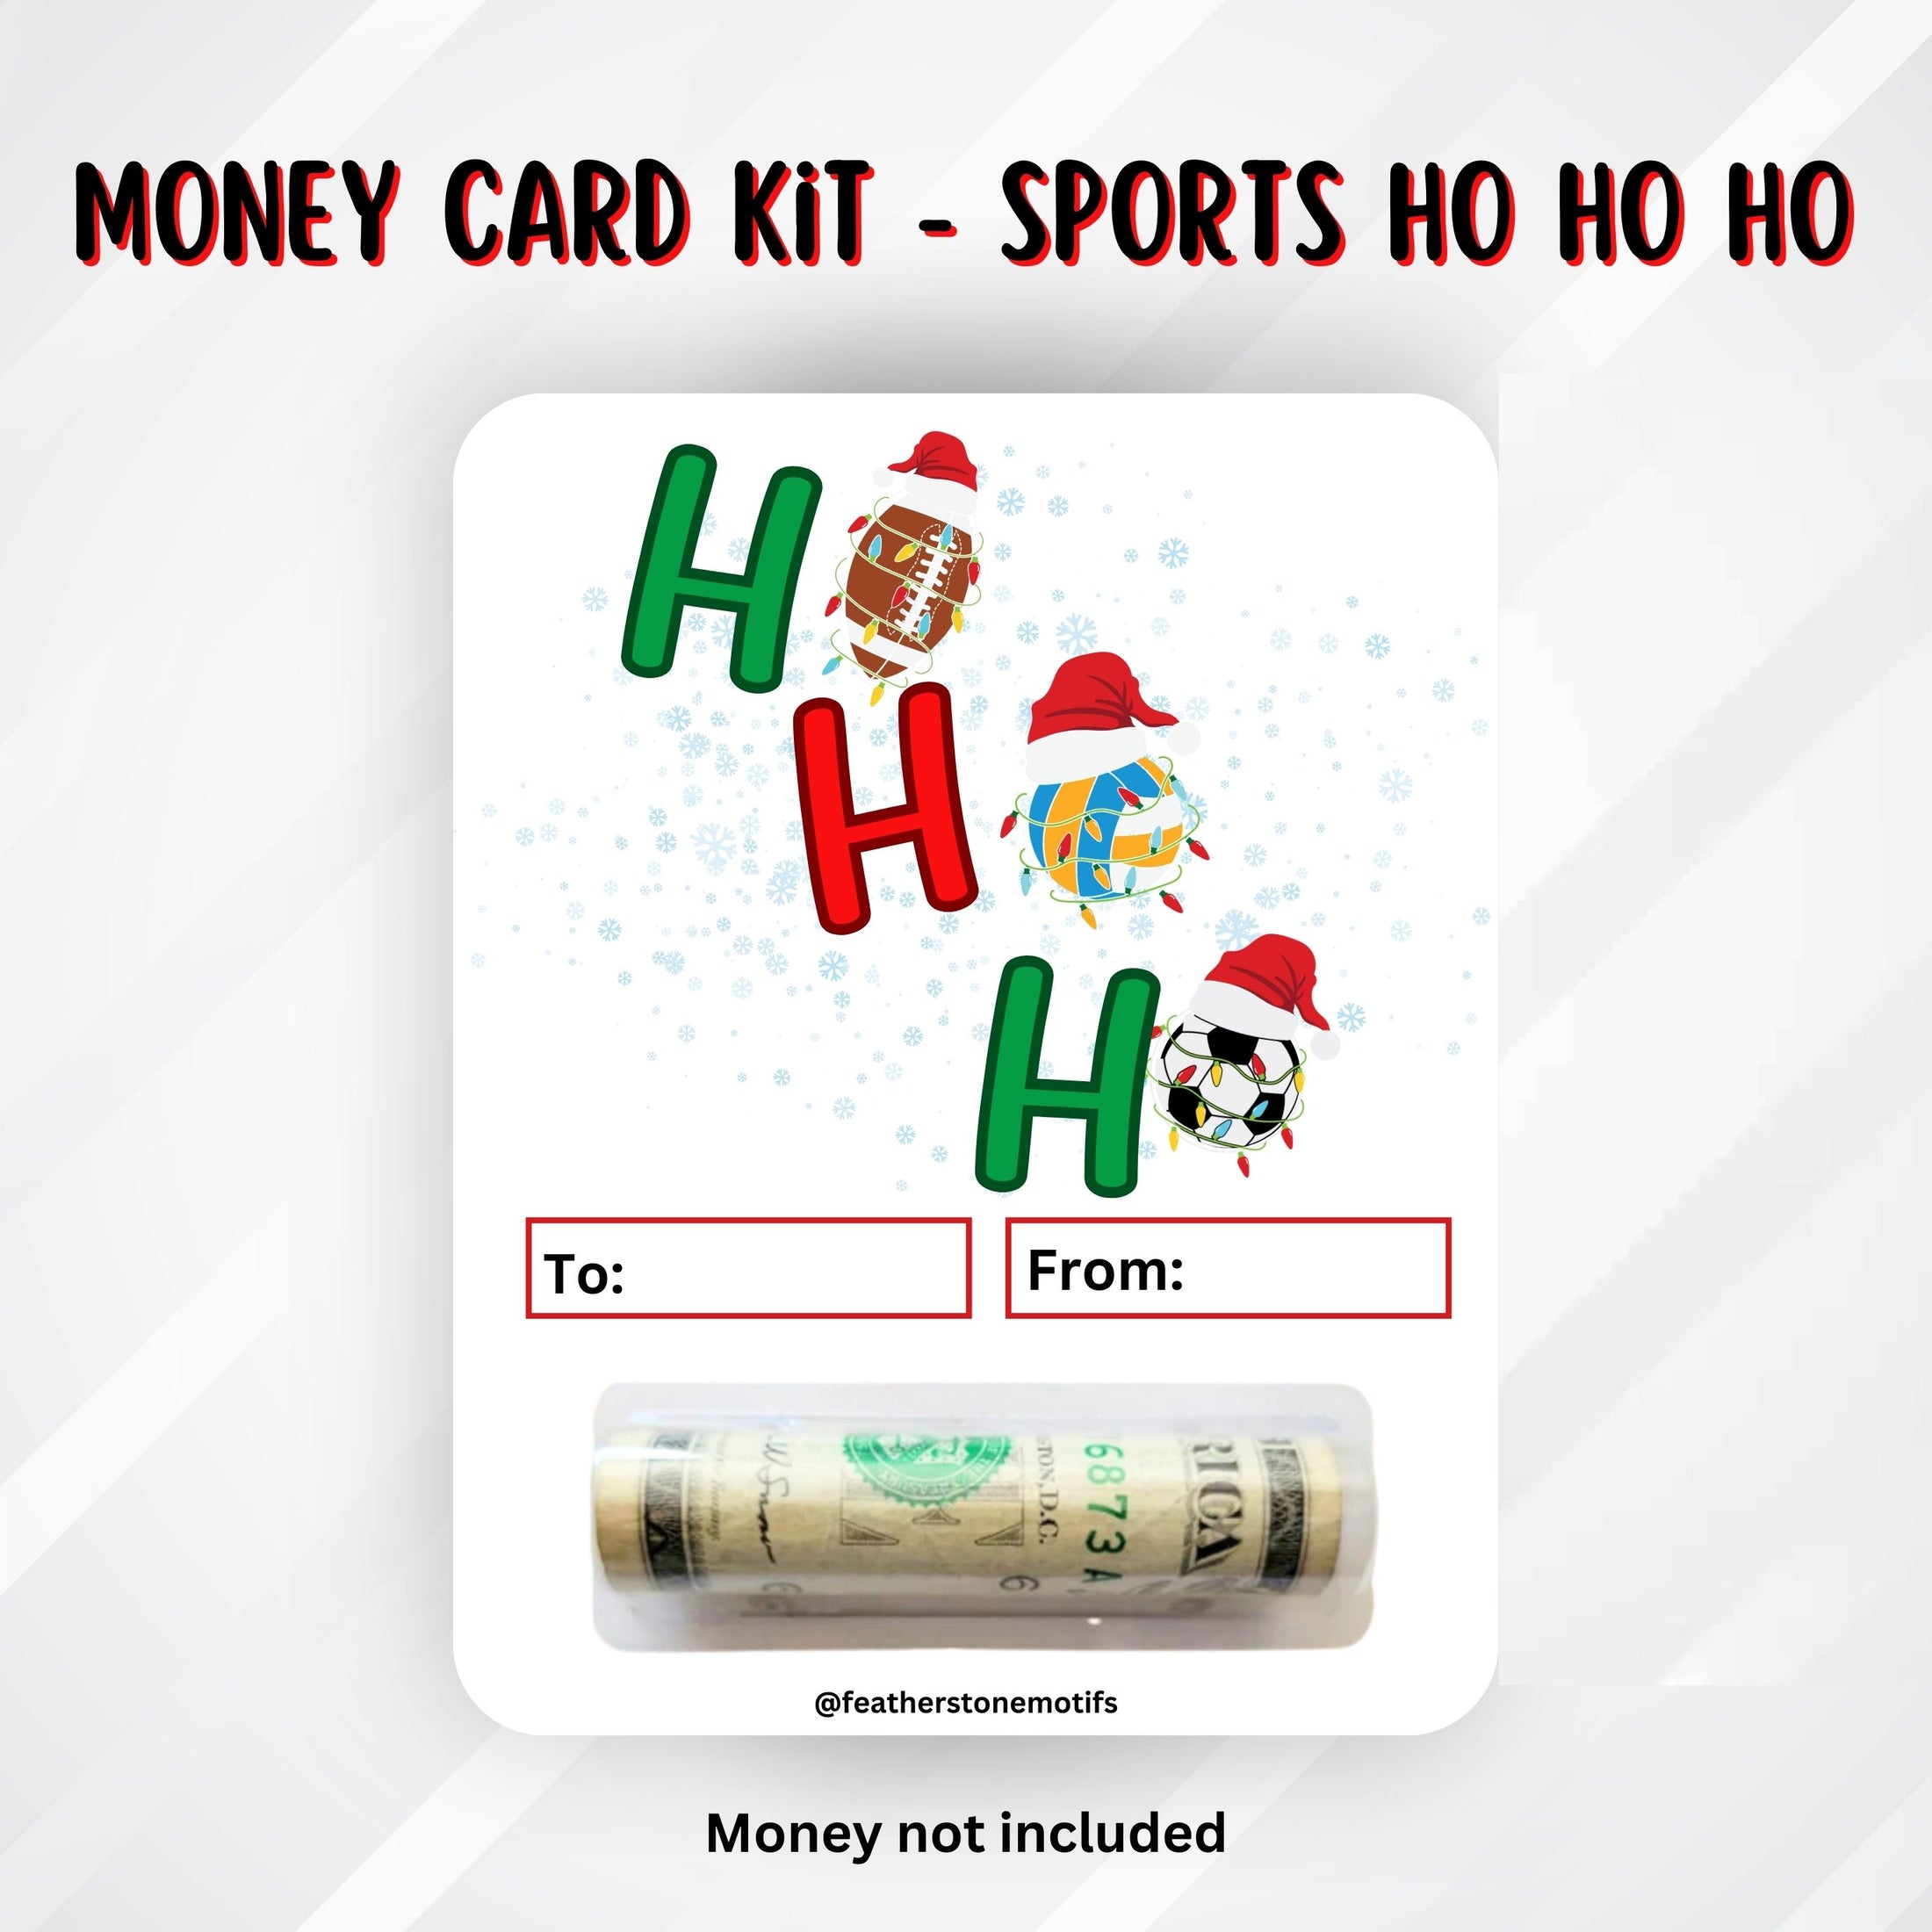 This image shows the money tube attached to the Sports Ho Ho Ho money card.